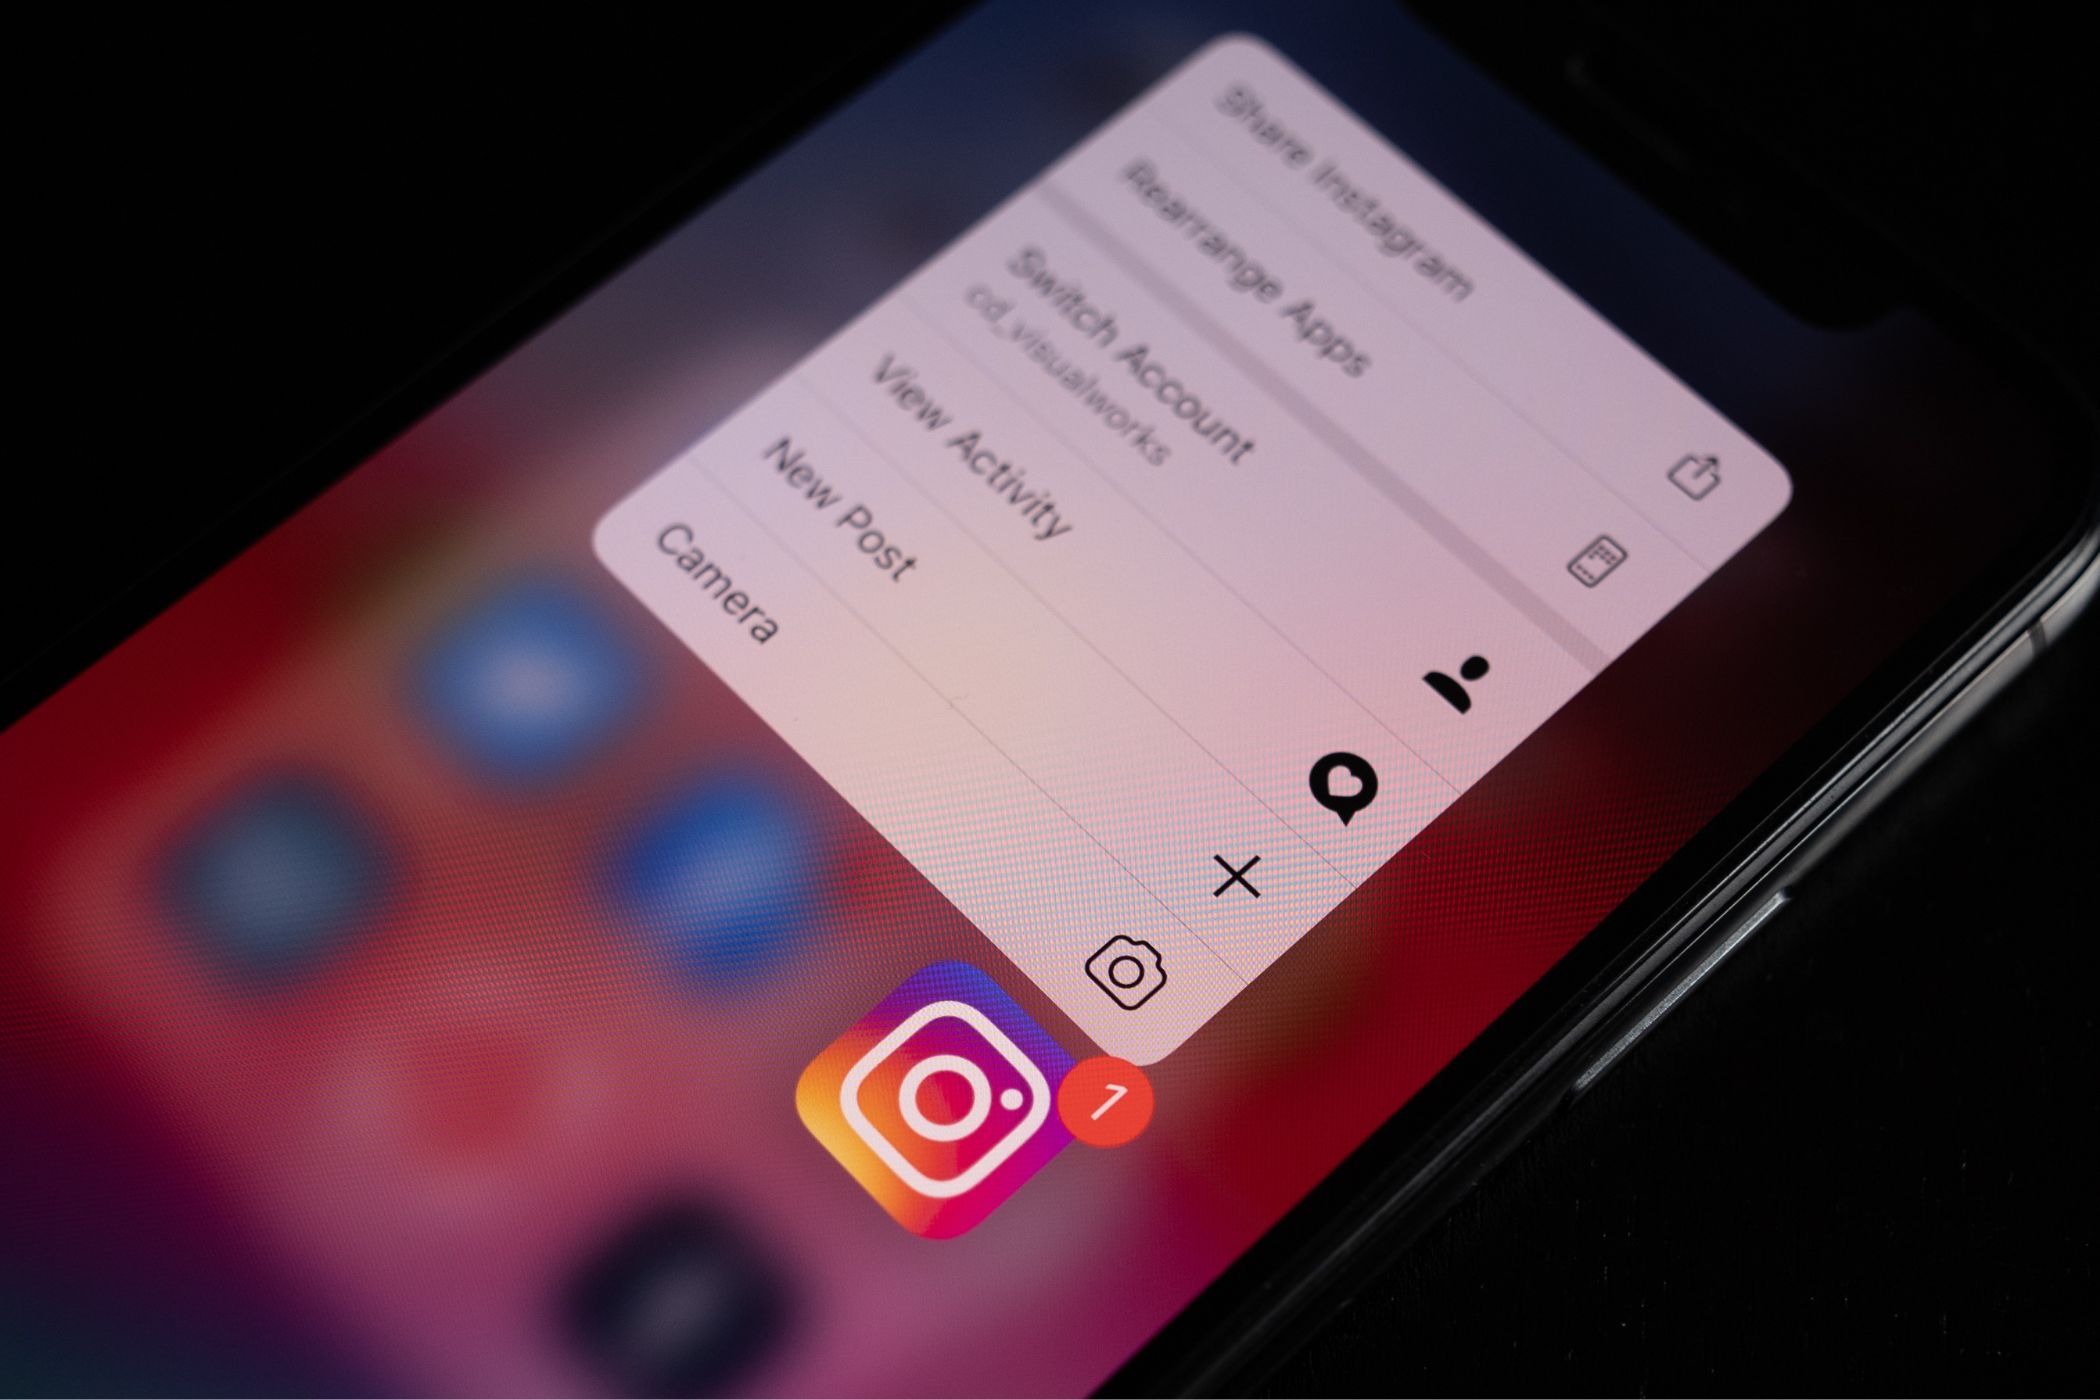 instagram app icon on a smartphone